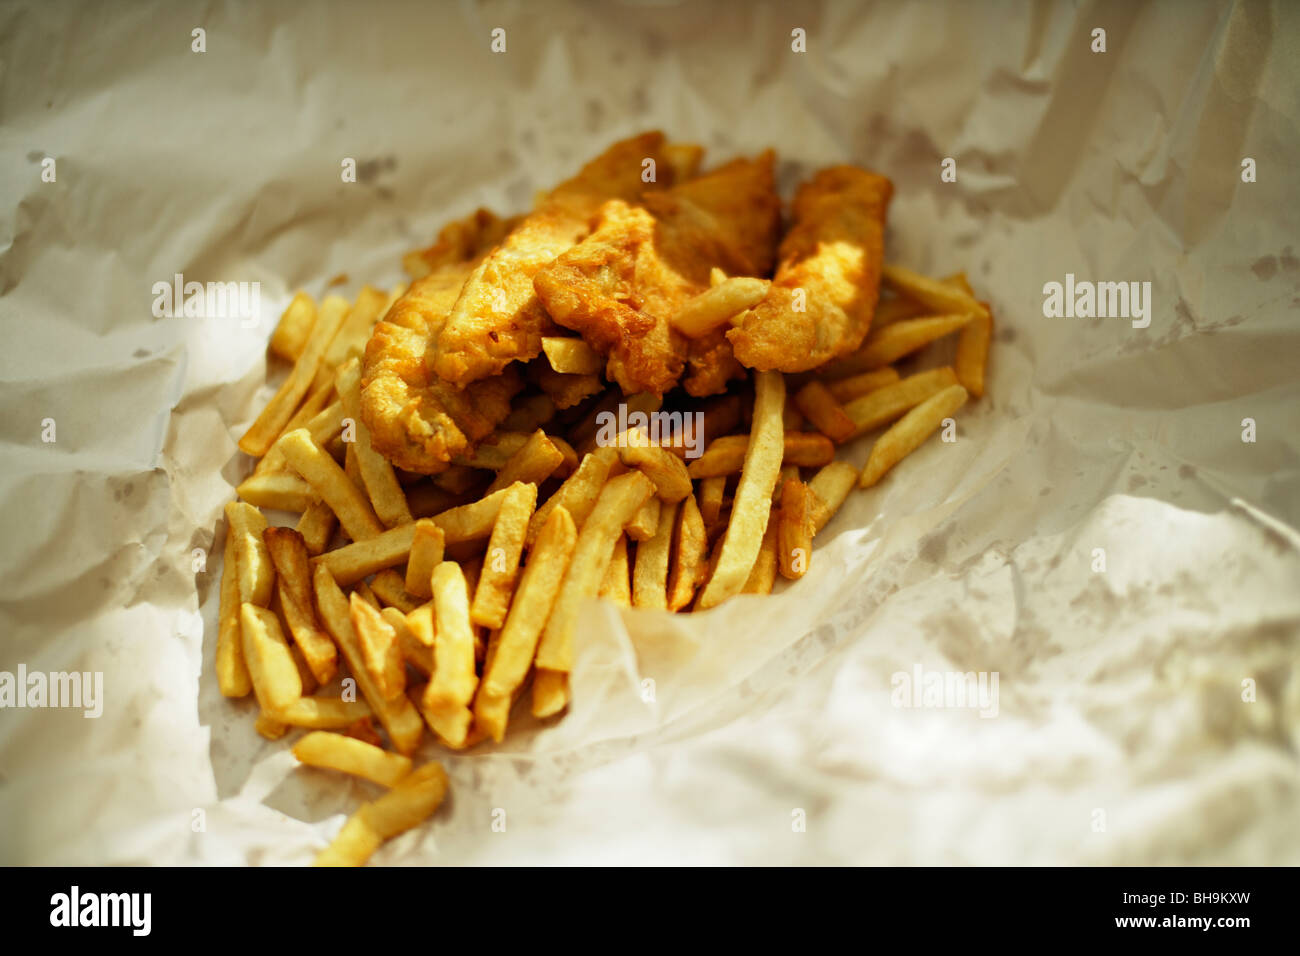 fish and chips Stock Photo